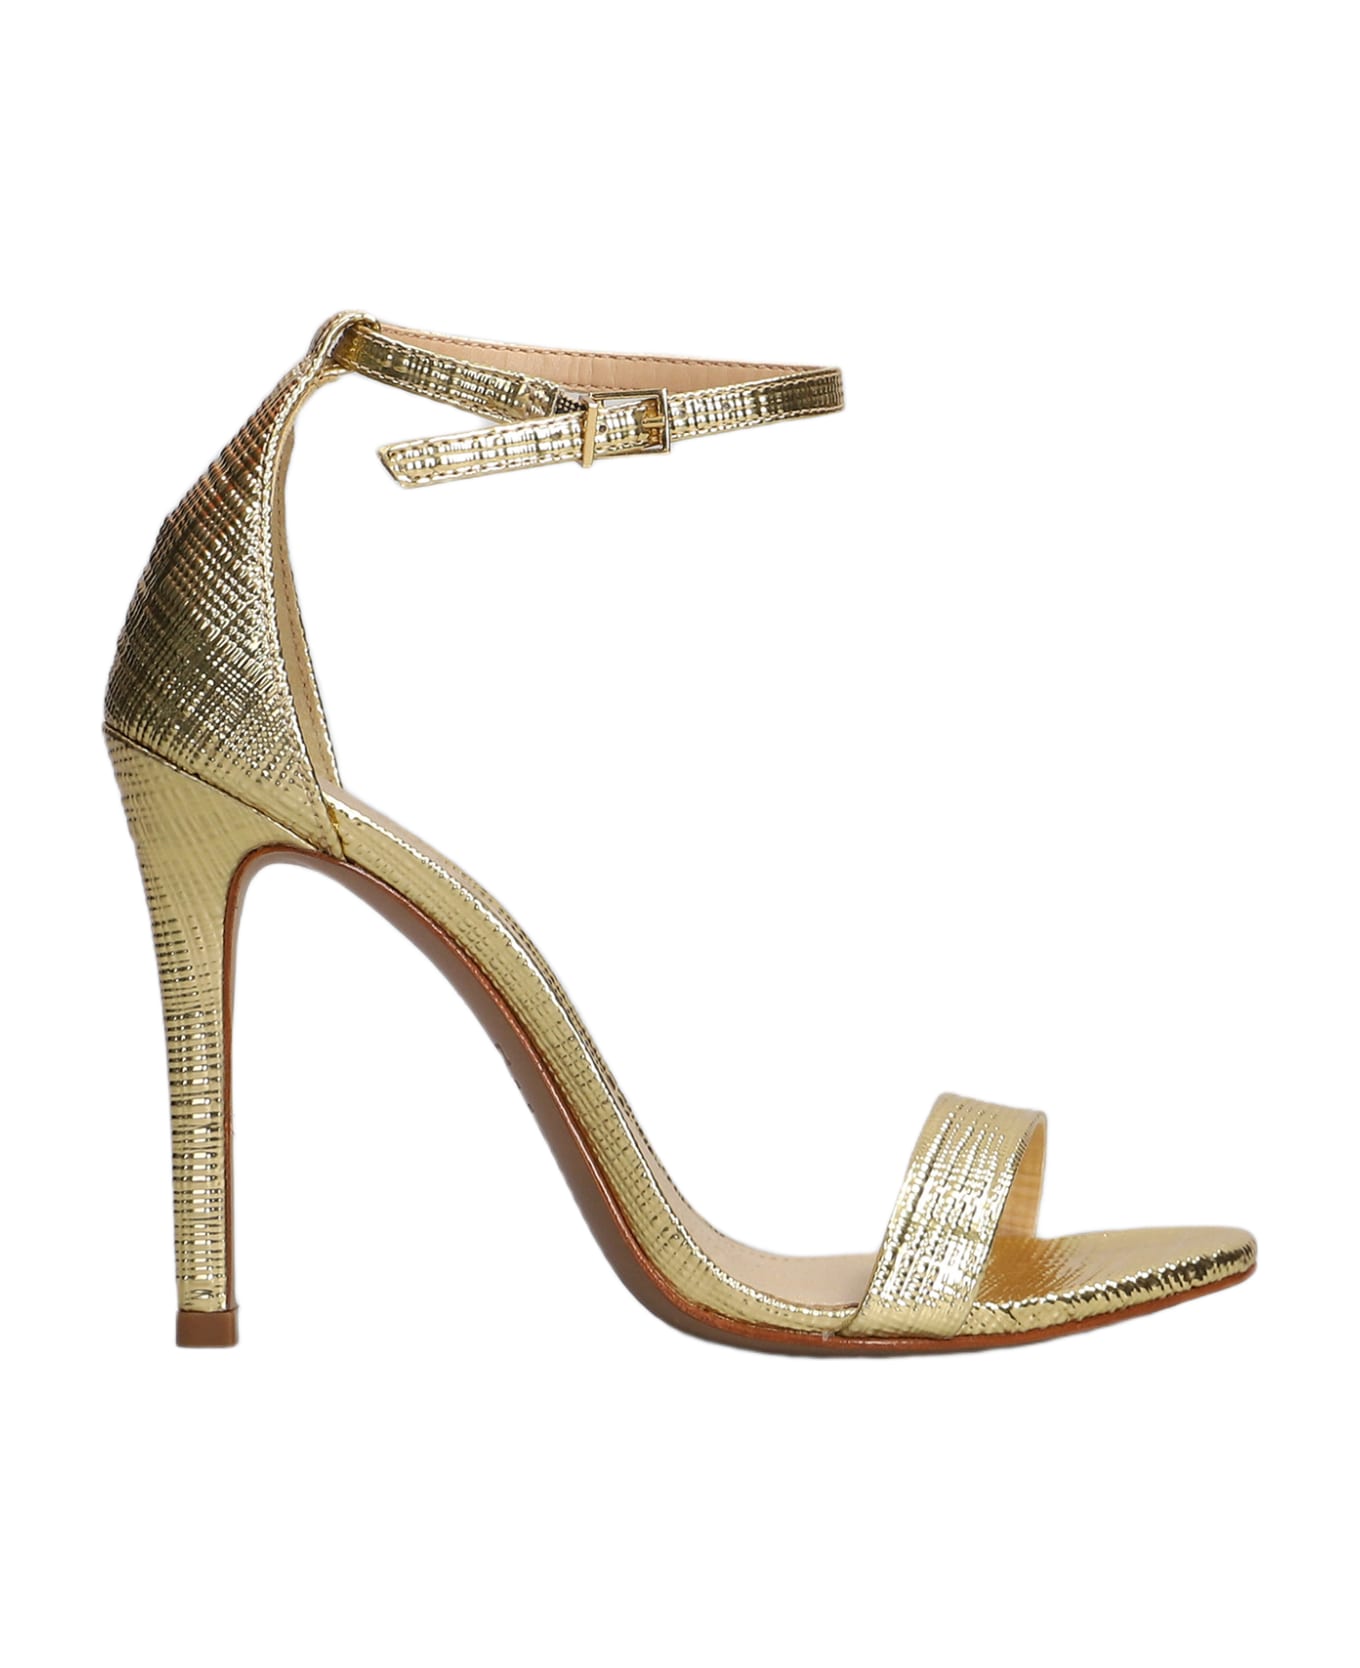 Schutz Sandals In Gold Leather - gold サンダル